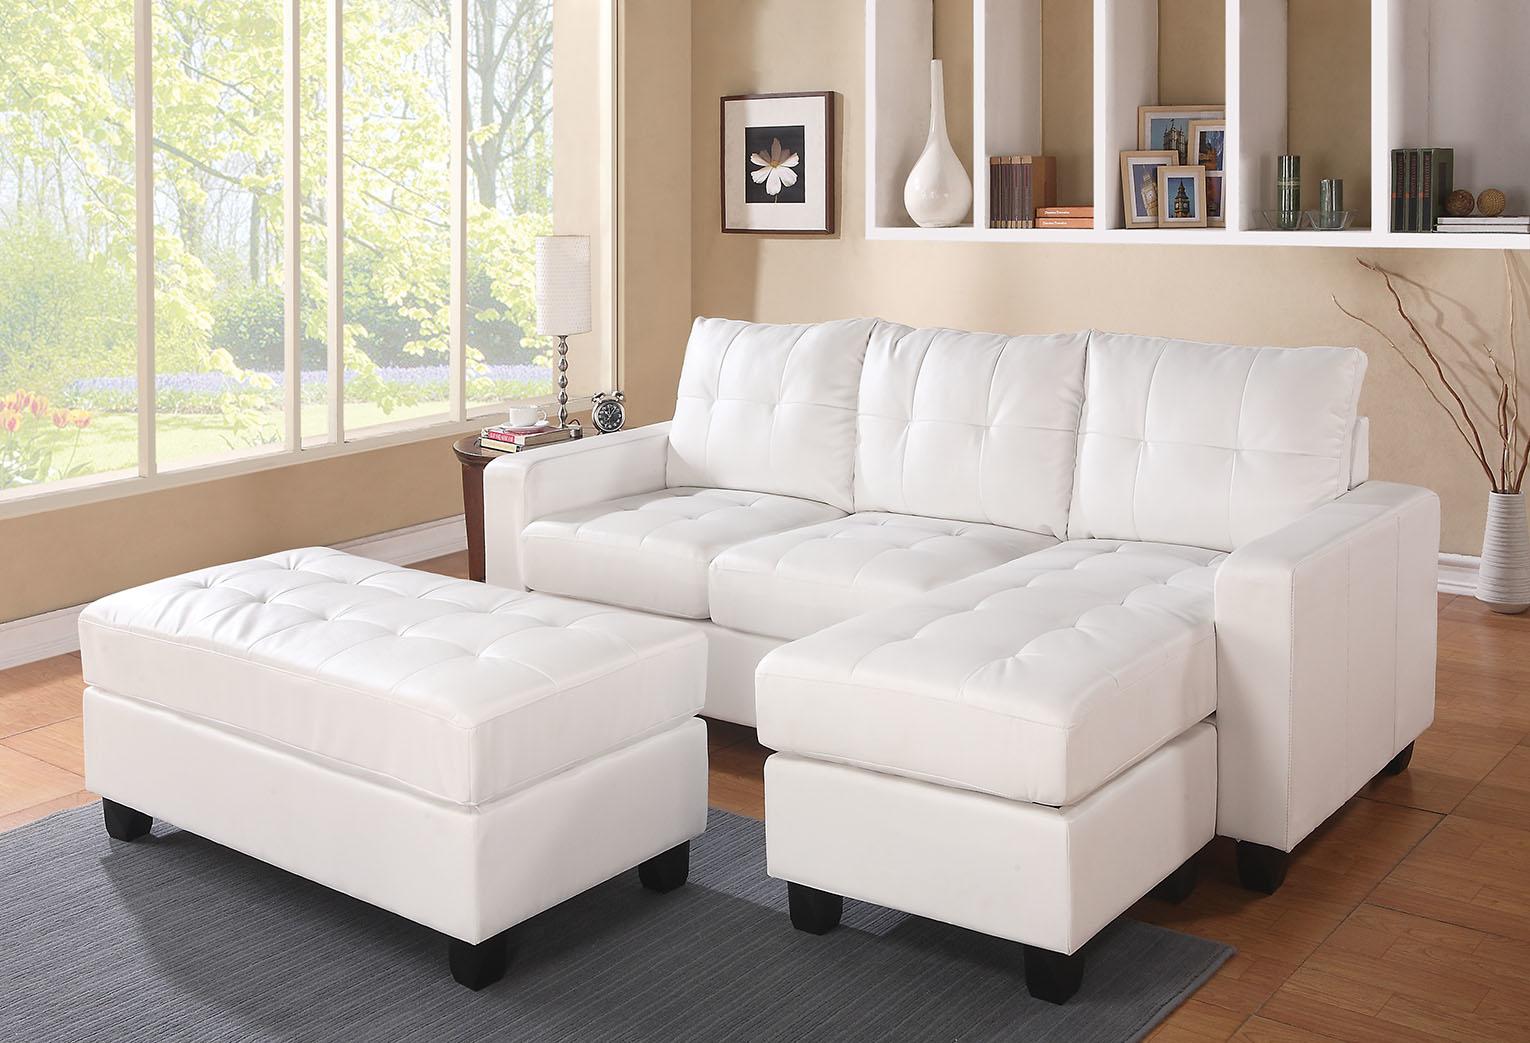 83" X 57" X 35" White Bonded Leather Match Sectional Sofa With Ottoman